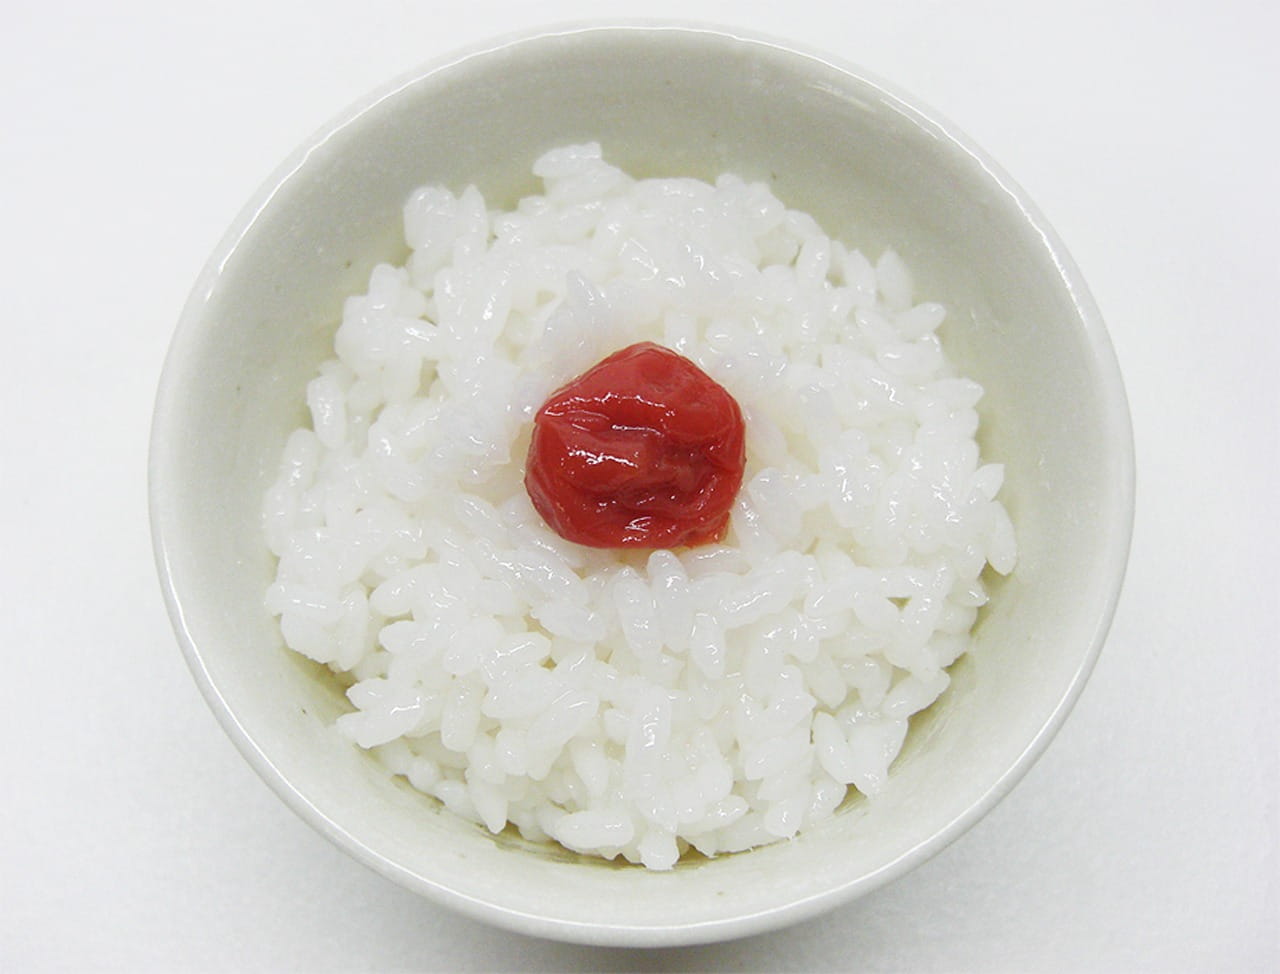 rice in white ceramic bowl, Food, Pickled, Plum, Salted, japanese